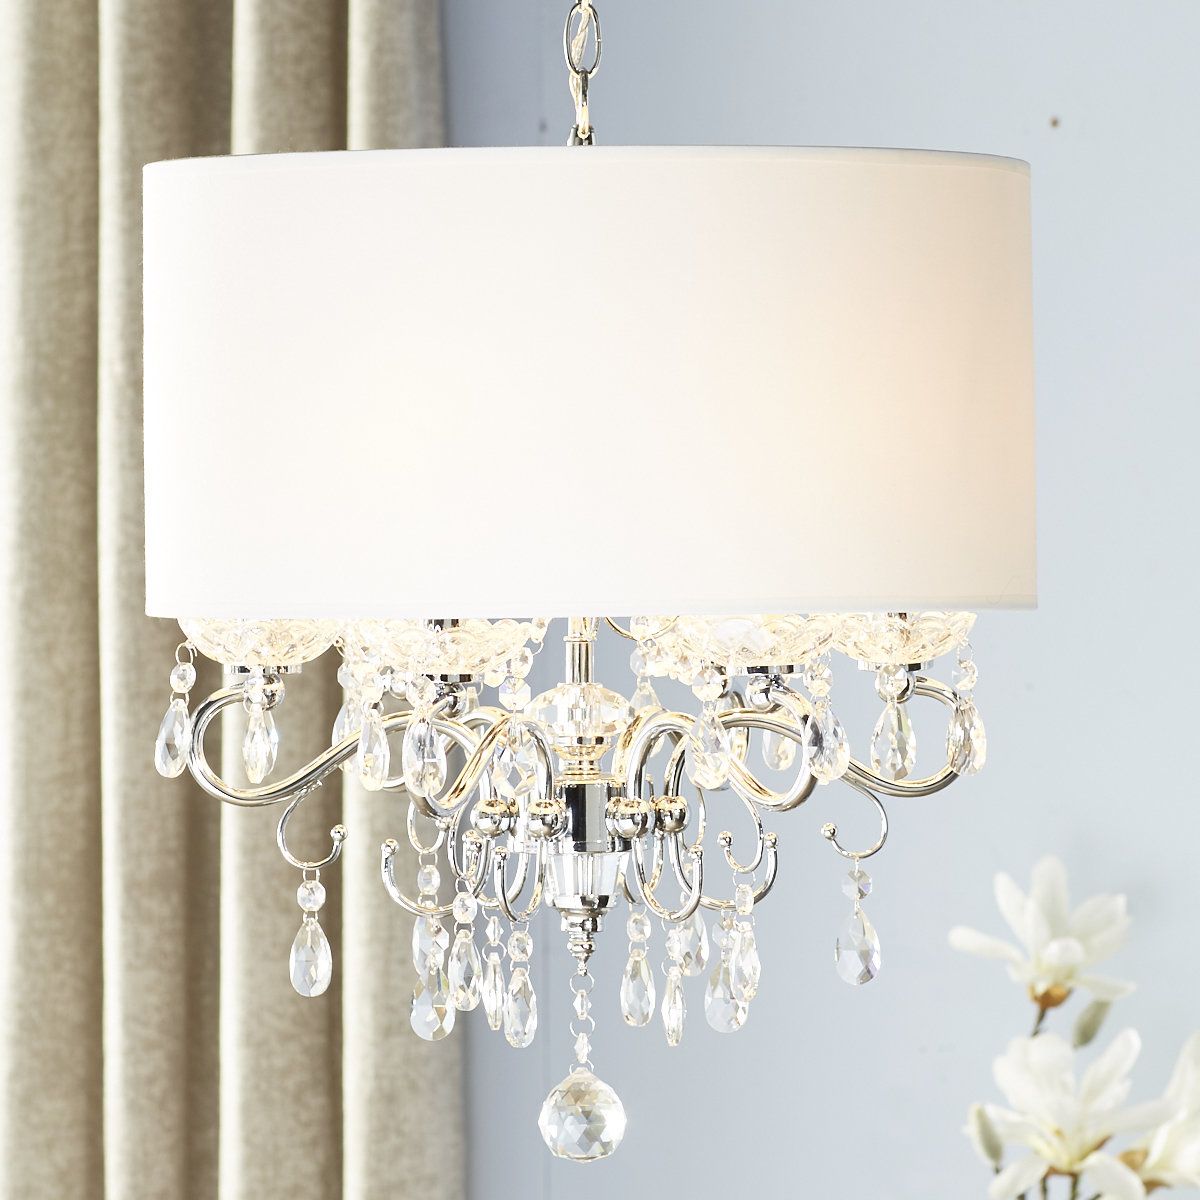 Preferred Buster 5 Light Drum Chandeliers Within Hawkins 6 Light Drum Chandelier (View 8 of 25)